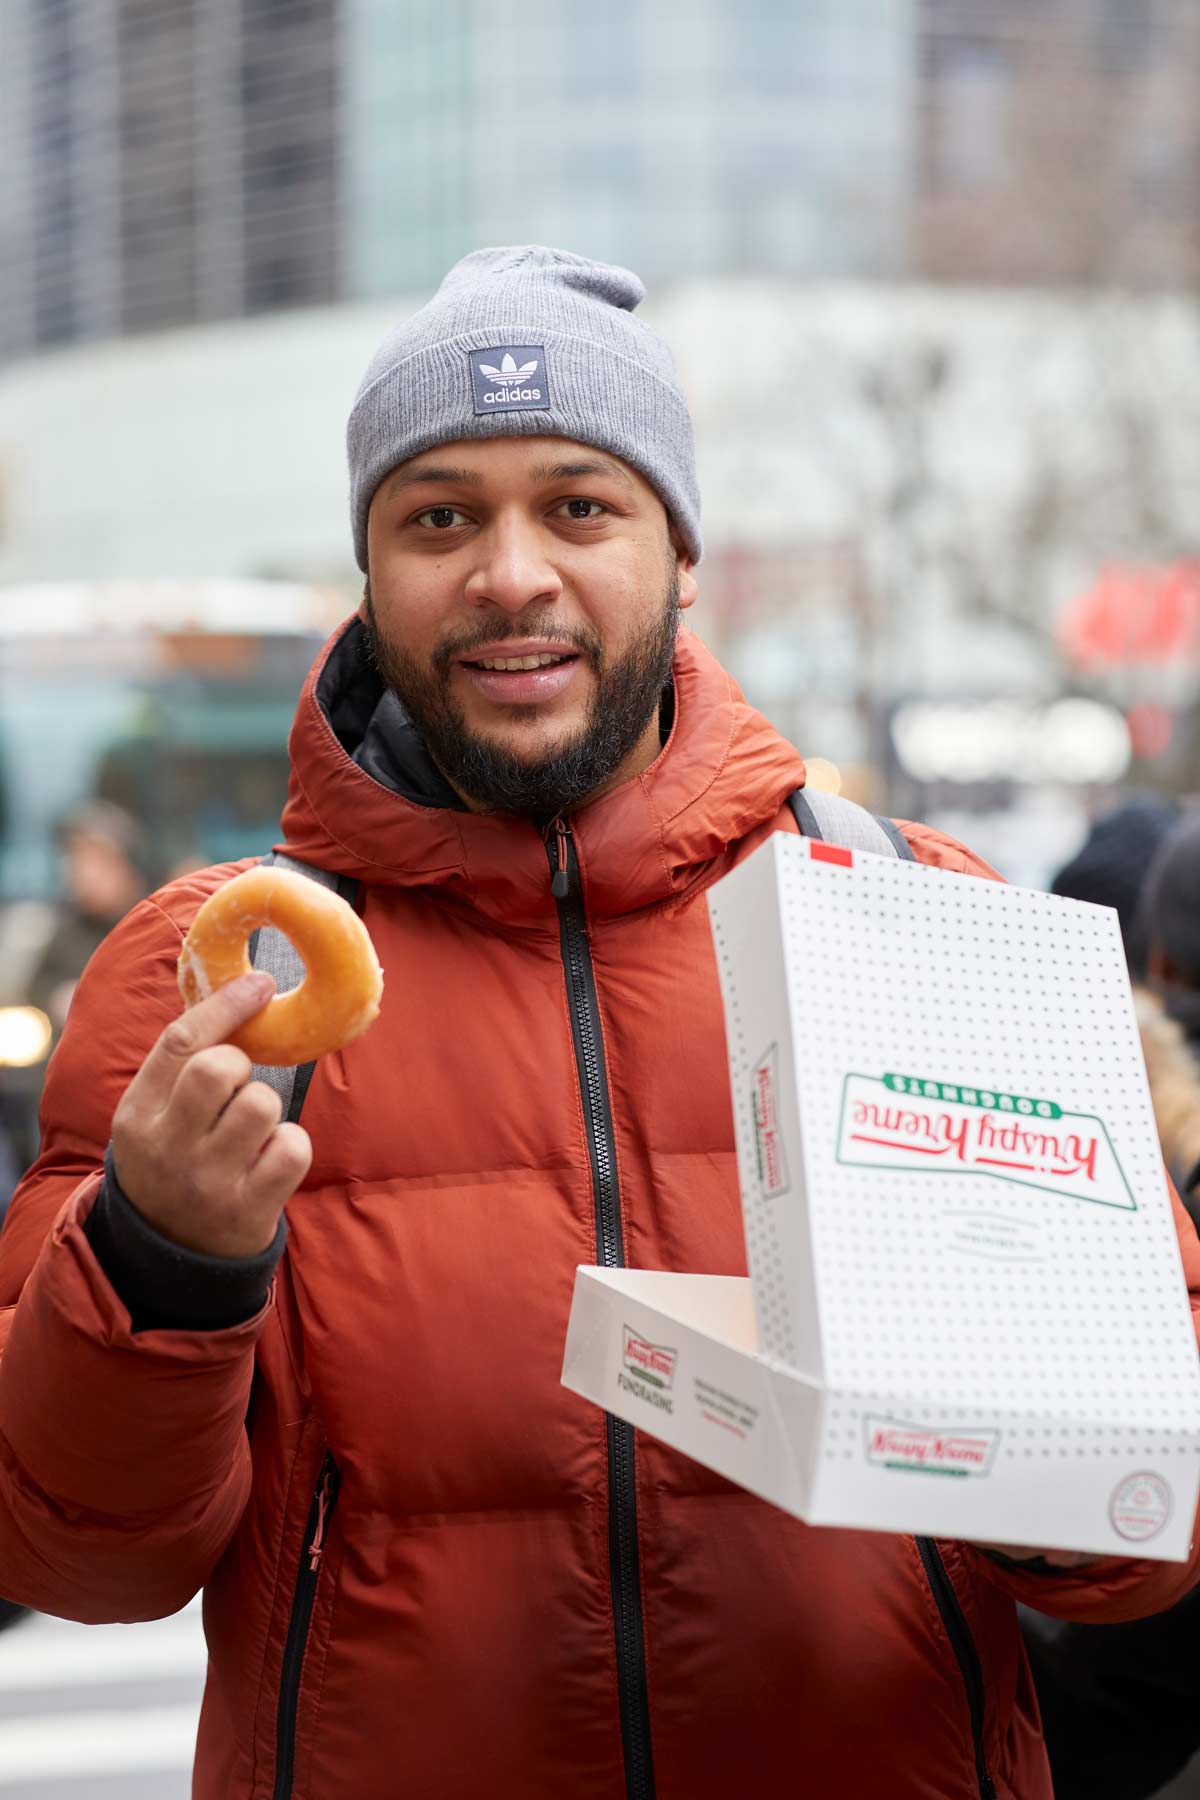 Commercial lifestyle photo of a man in a coat and hat carrying a box of Krispy Kreme doughnuts on the street in NYC